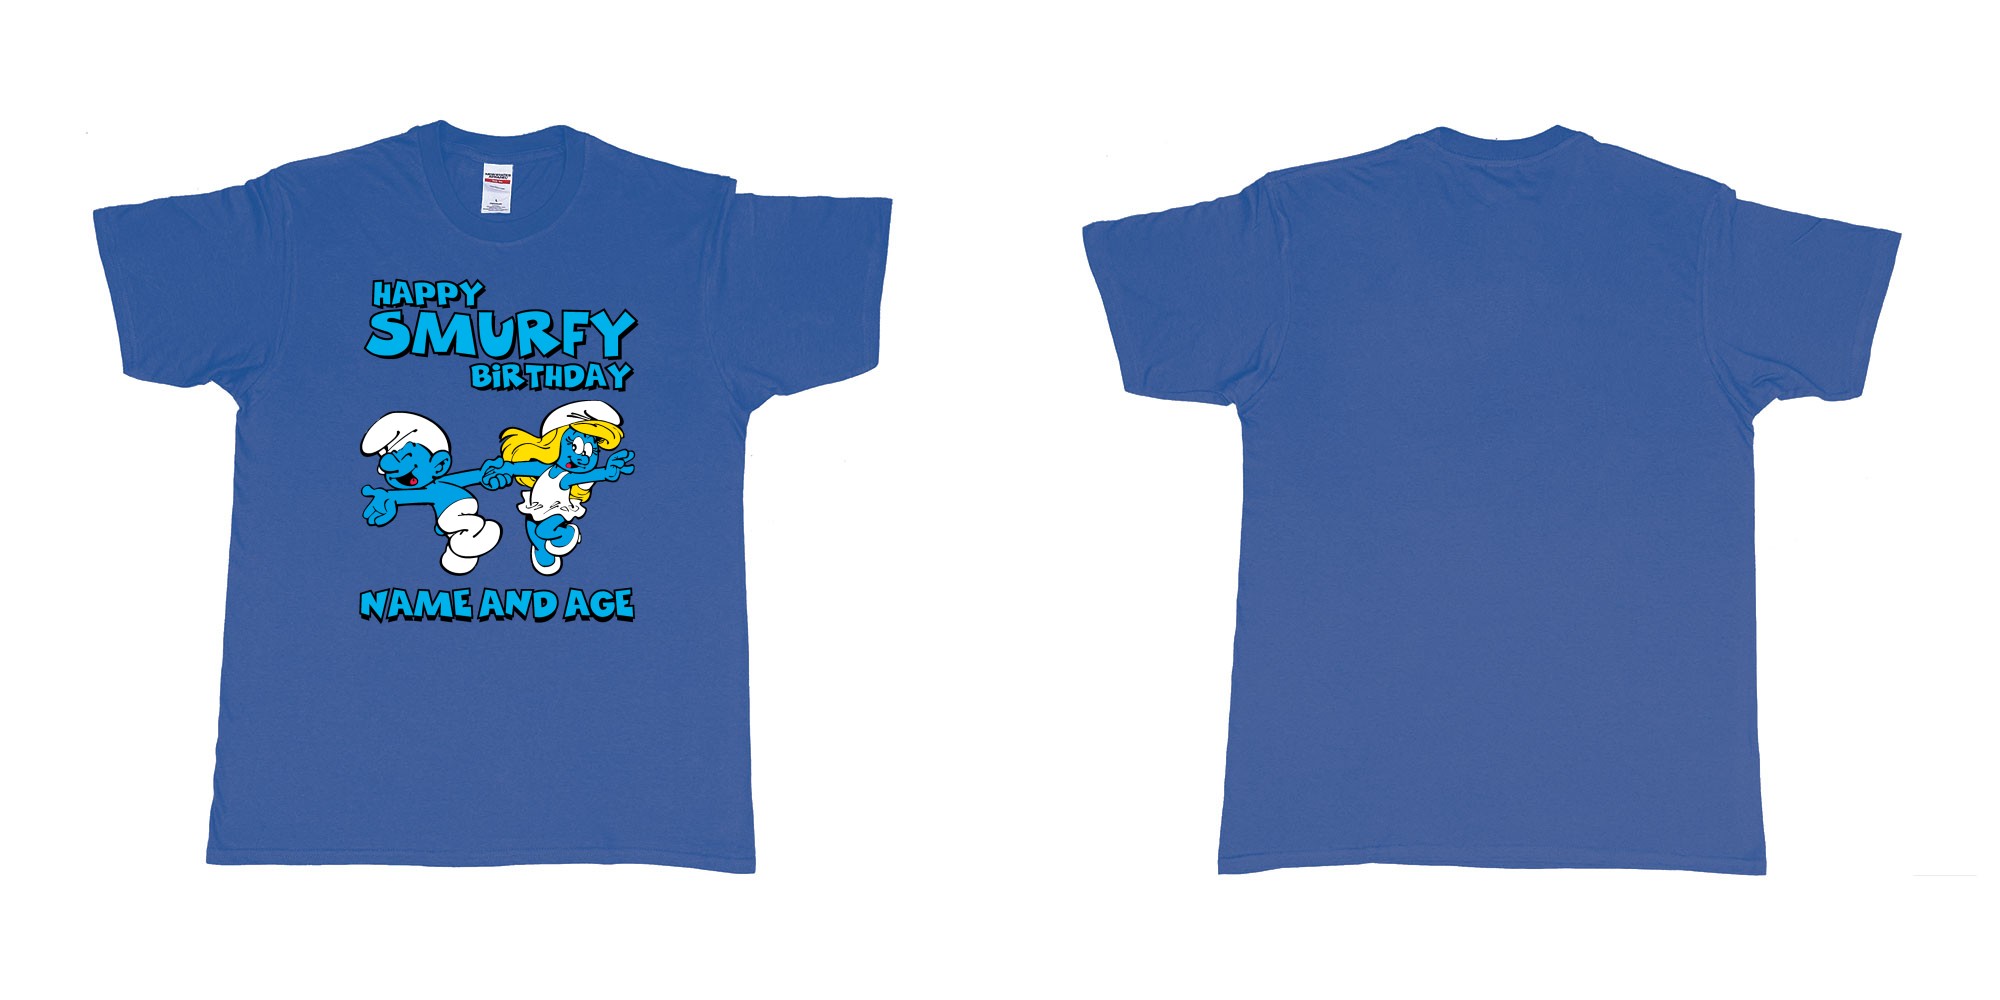 Custom tshirt design happy smurfy birthday in fabric color royal-blue choice your own text made in Bali by The Pirate Way